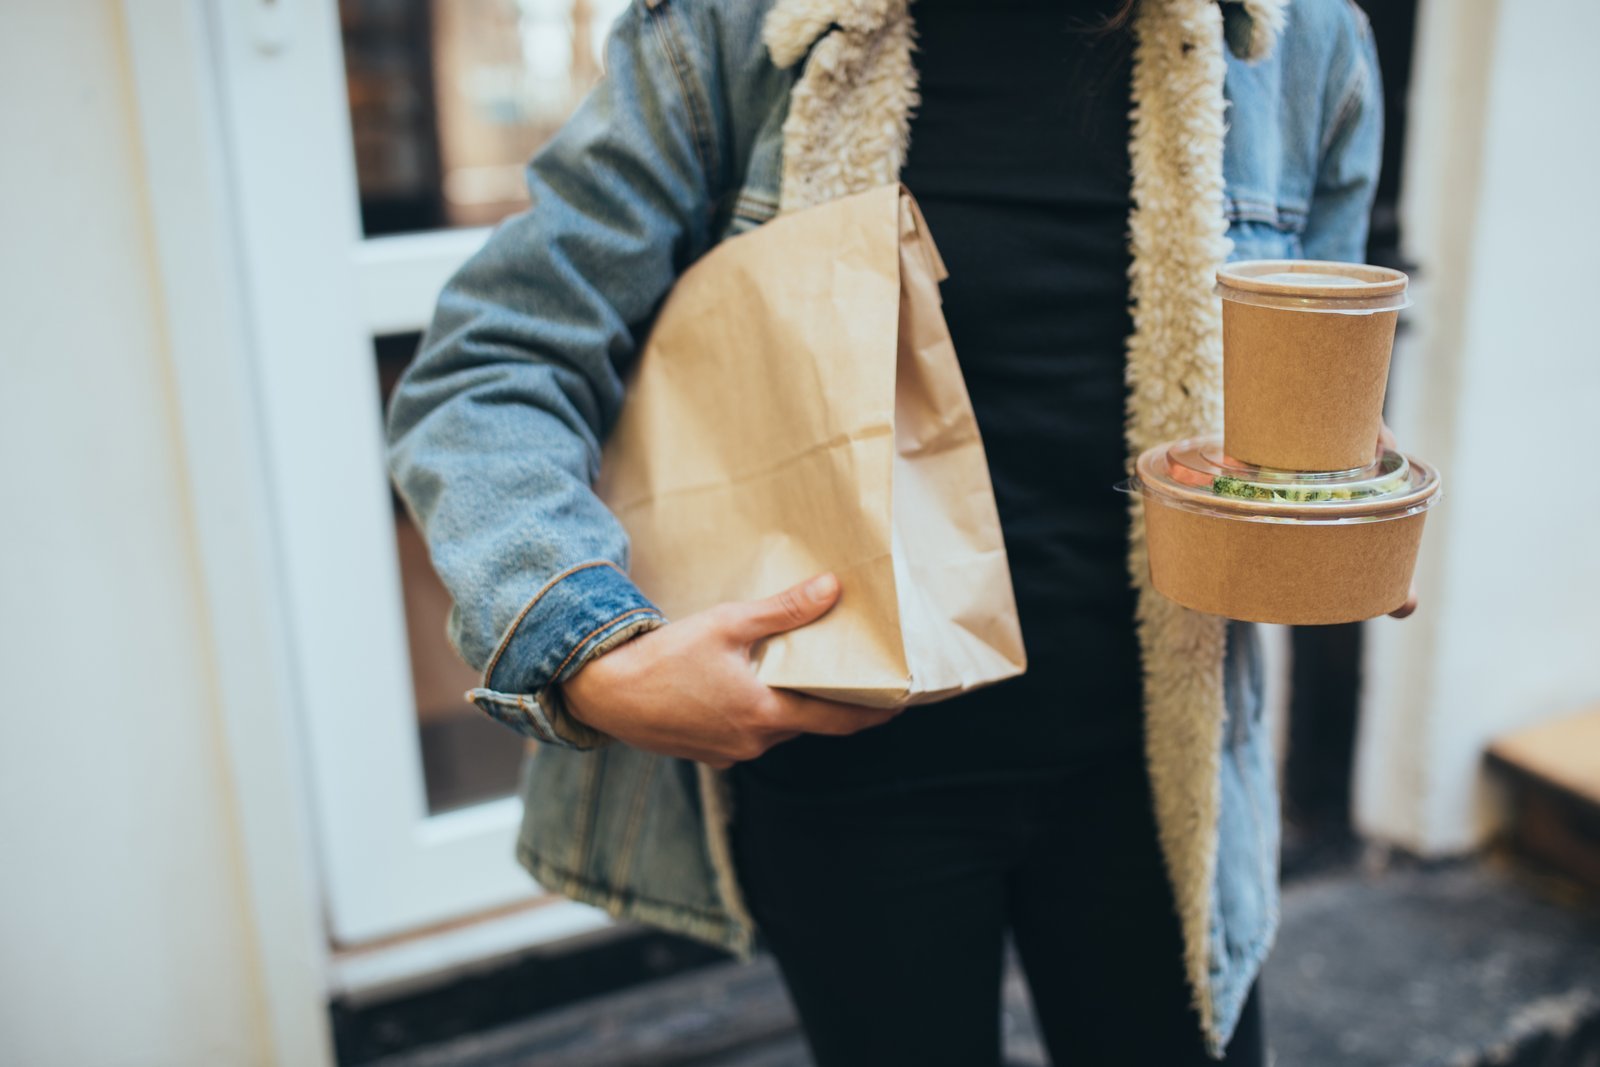 millennial-woman-holding-paper-bag-with-takeaway-food-and-coffee-to-go-.jpg